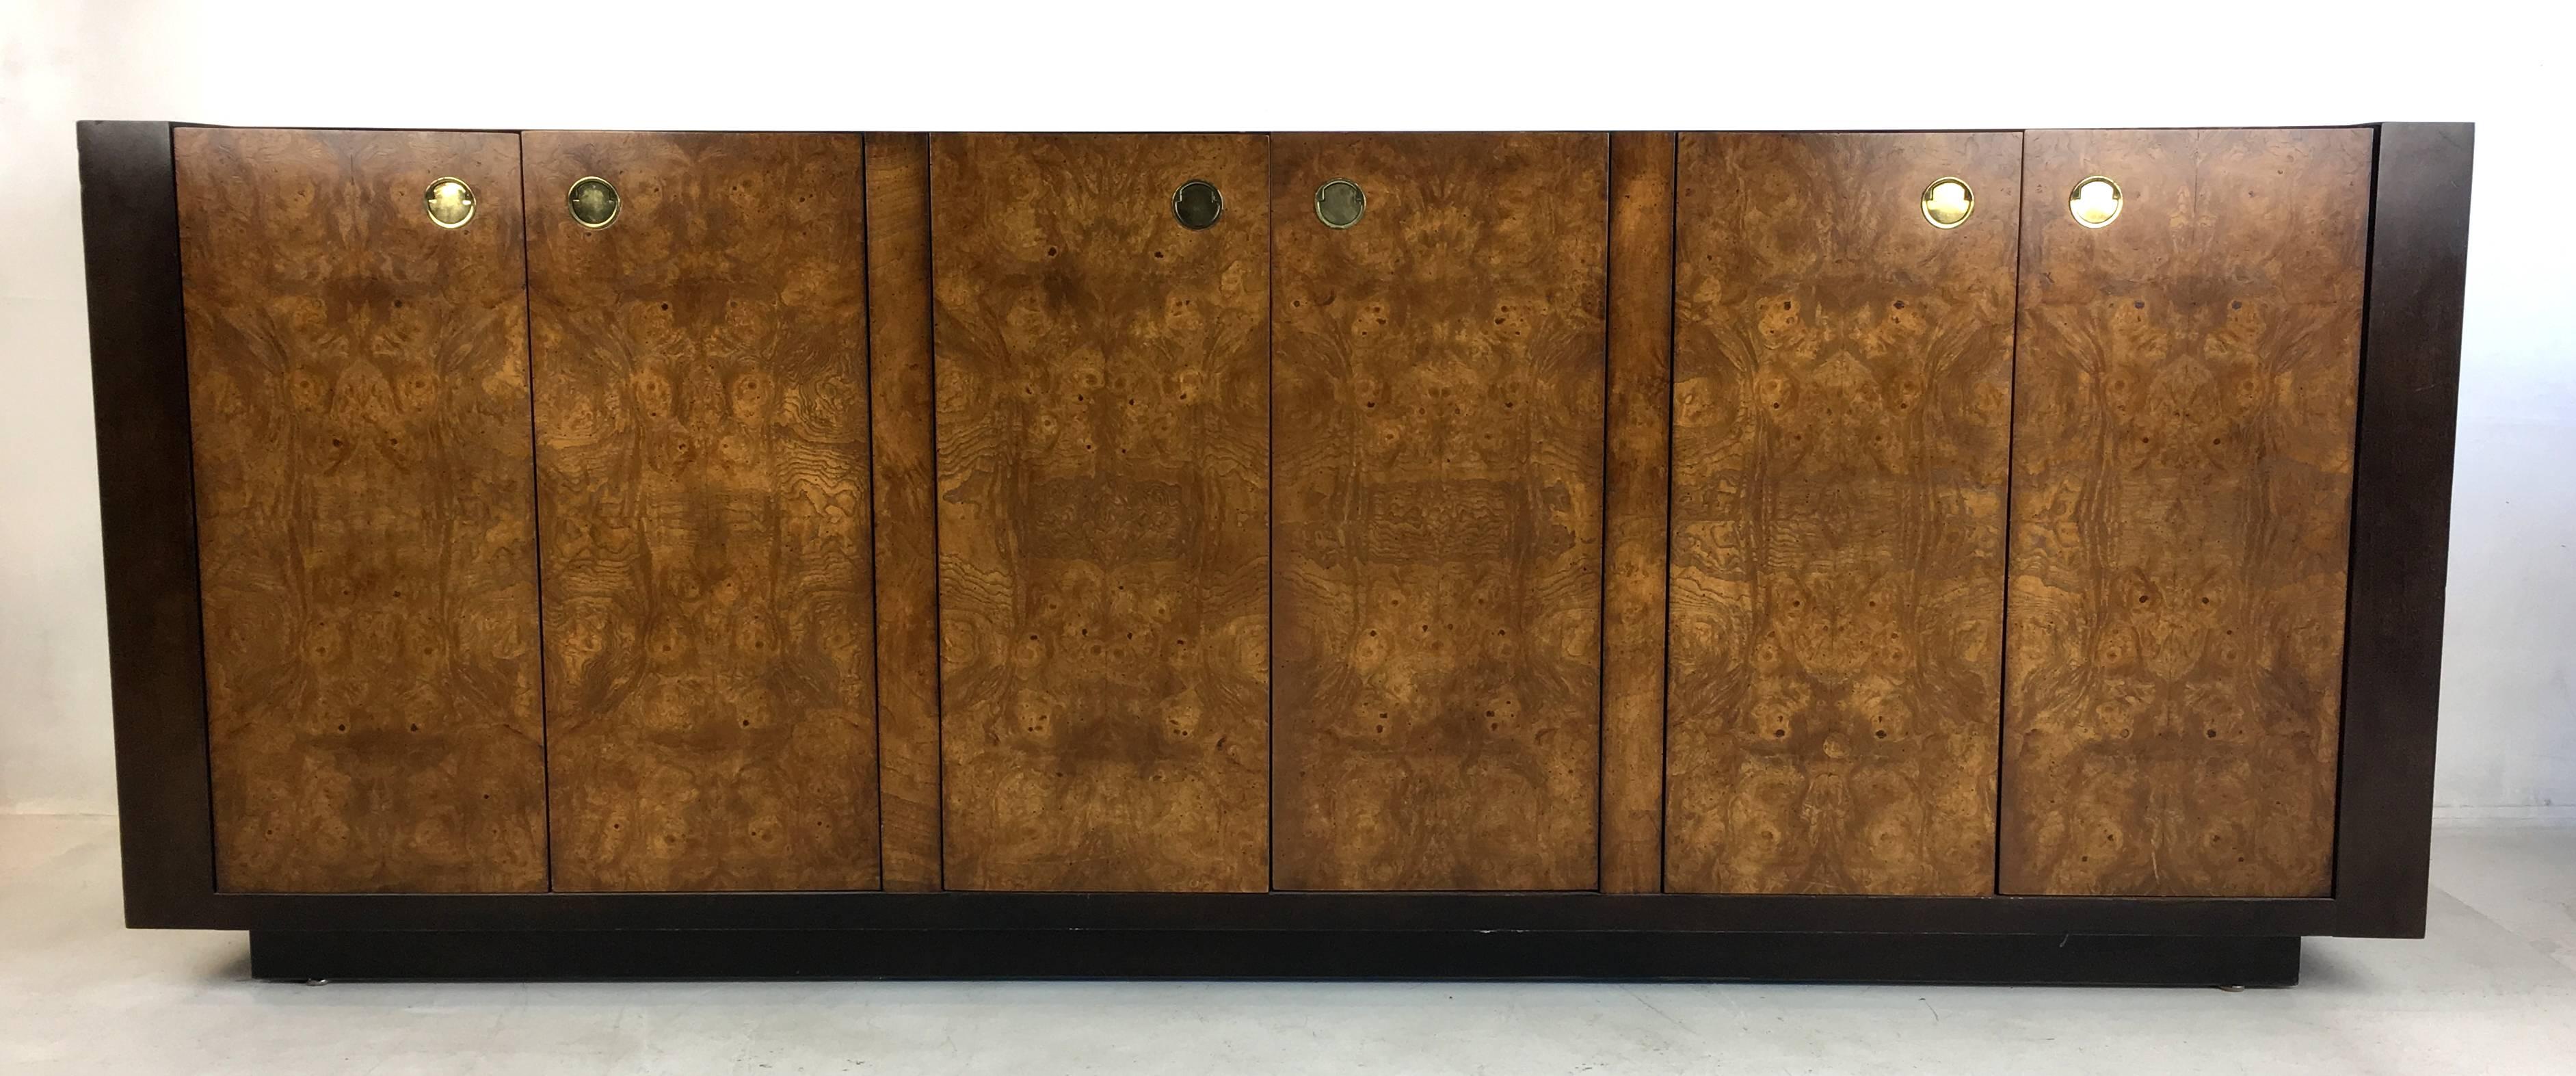 Beautifully crafted mahogany buffet with Carpathian elm burl top and doors with flush brass finger pulls evocative of the works of Paul Evans.  The dark brown lacquered Mahogany end panels accentuate the vibrant bookmatched burl veneers.  Top